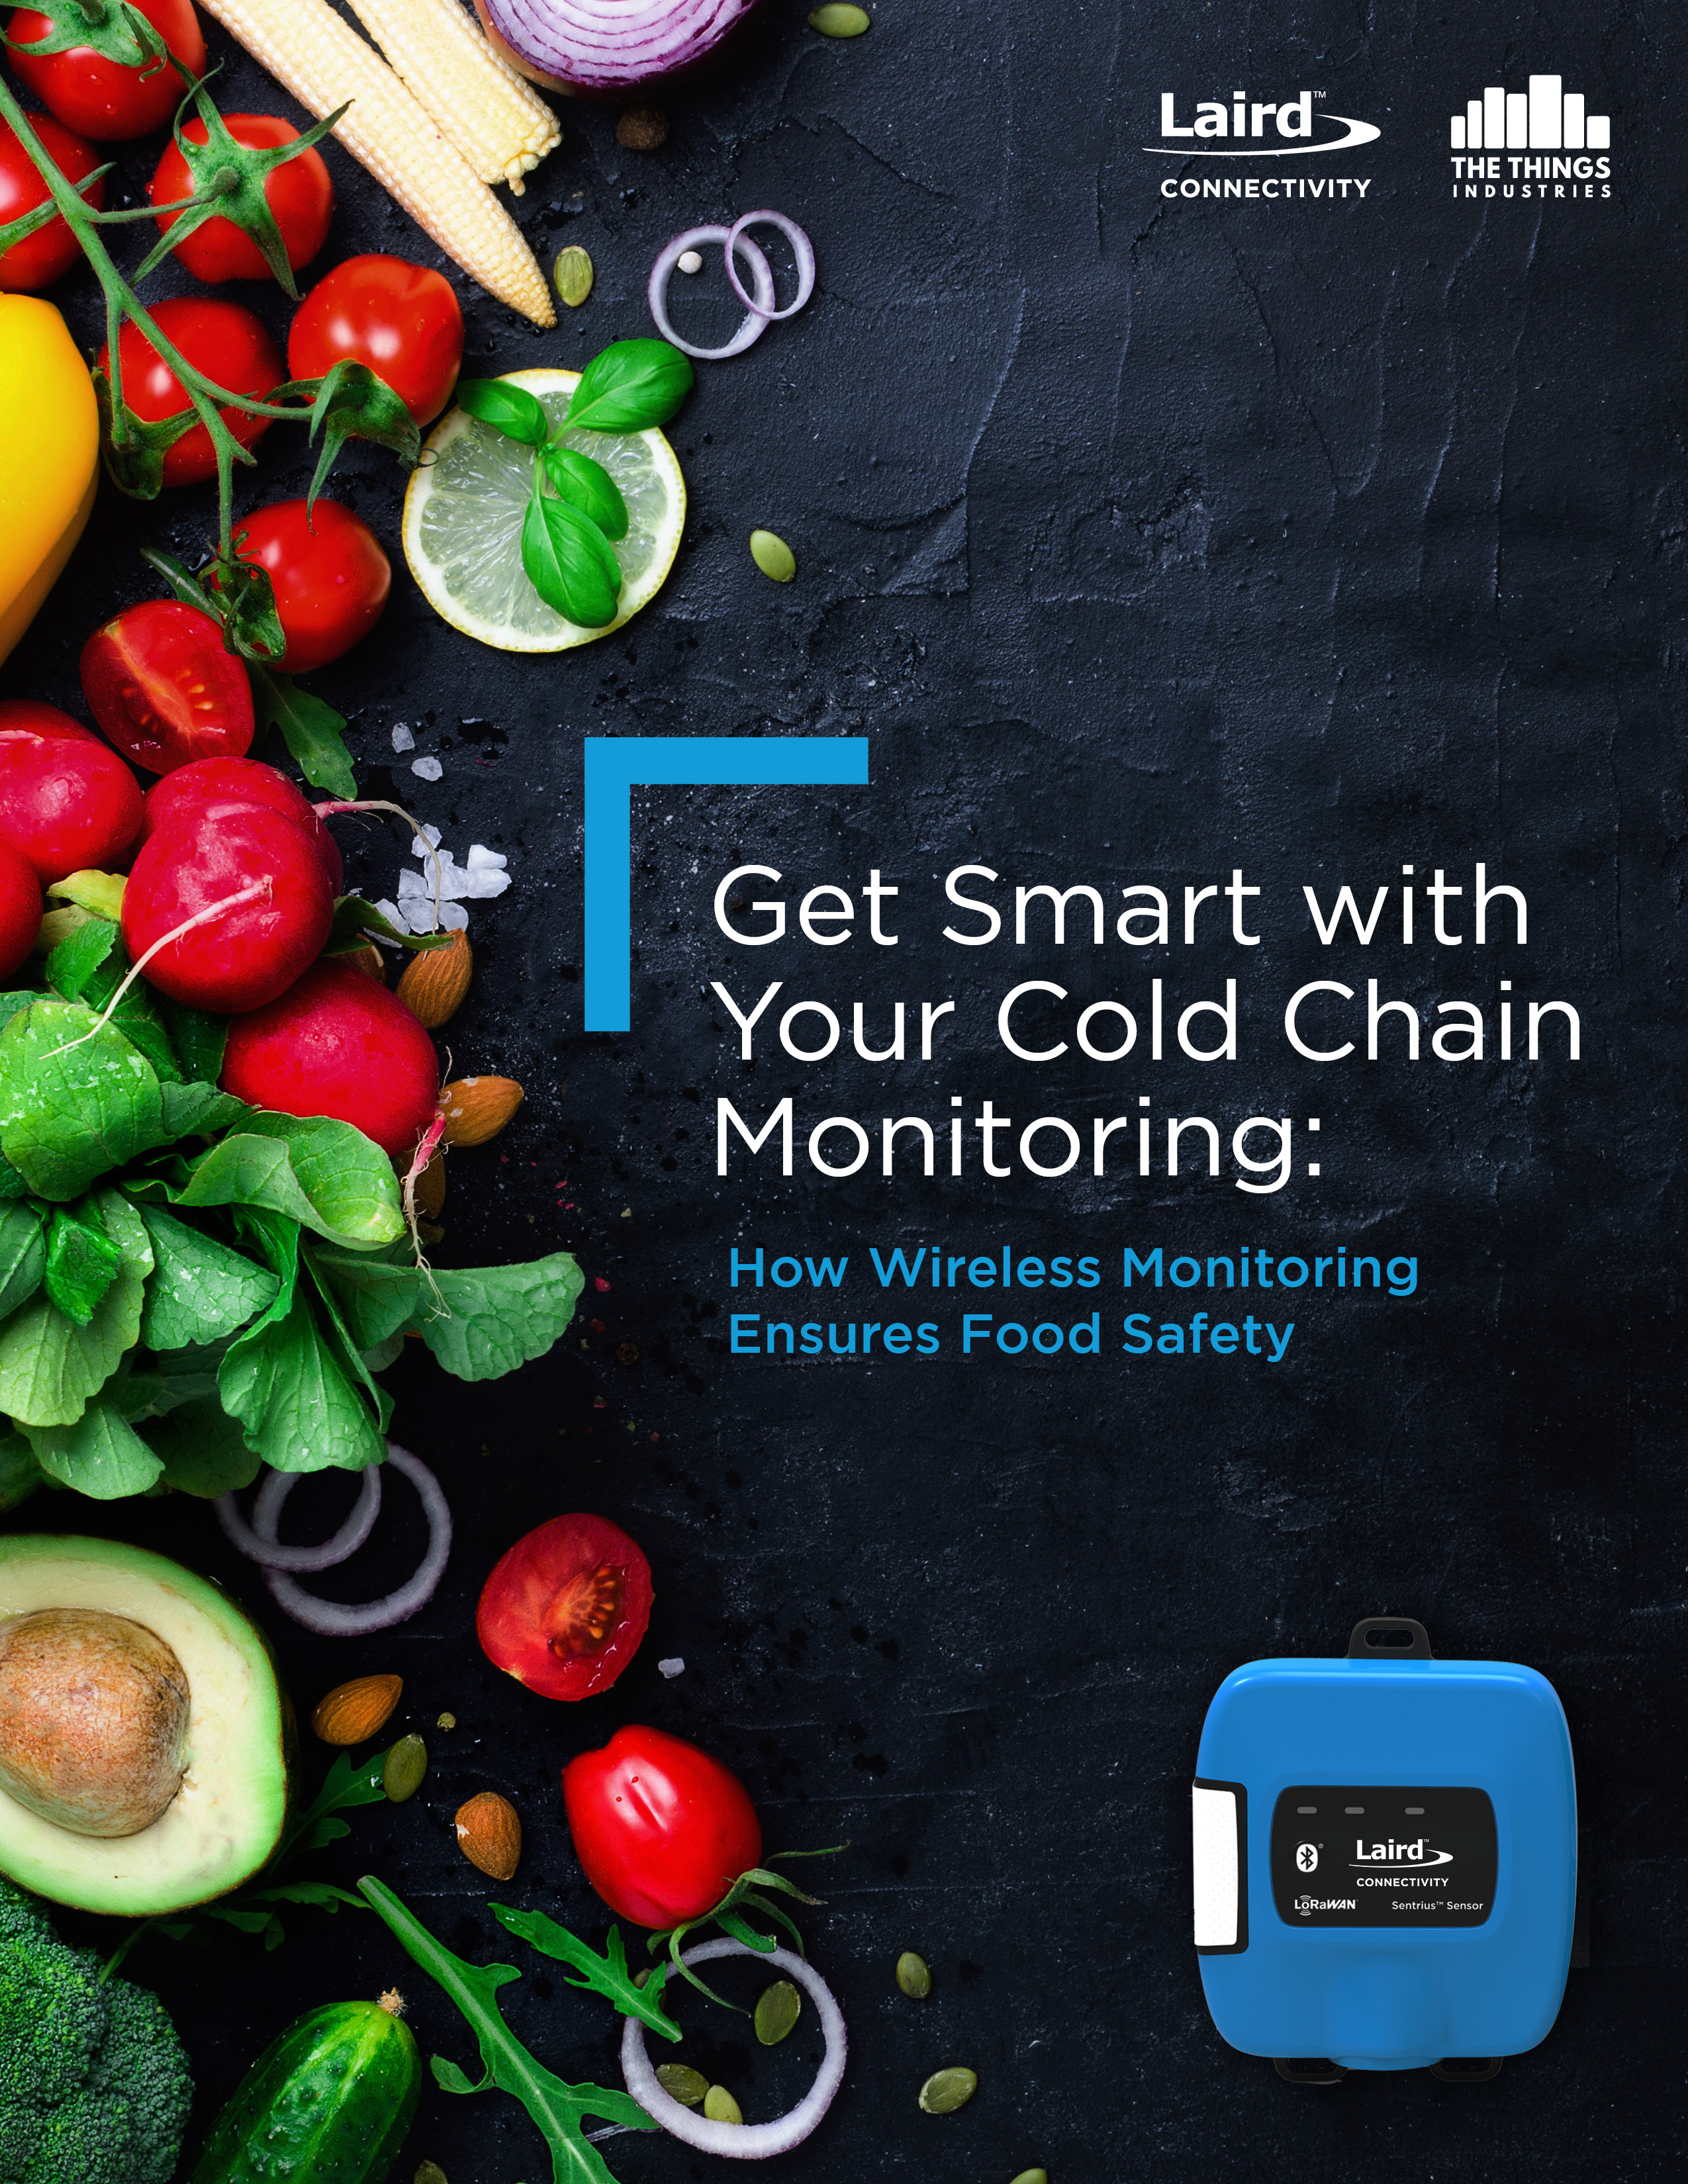 Get Smart With Your Cold Chain Monitoring